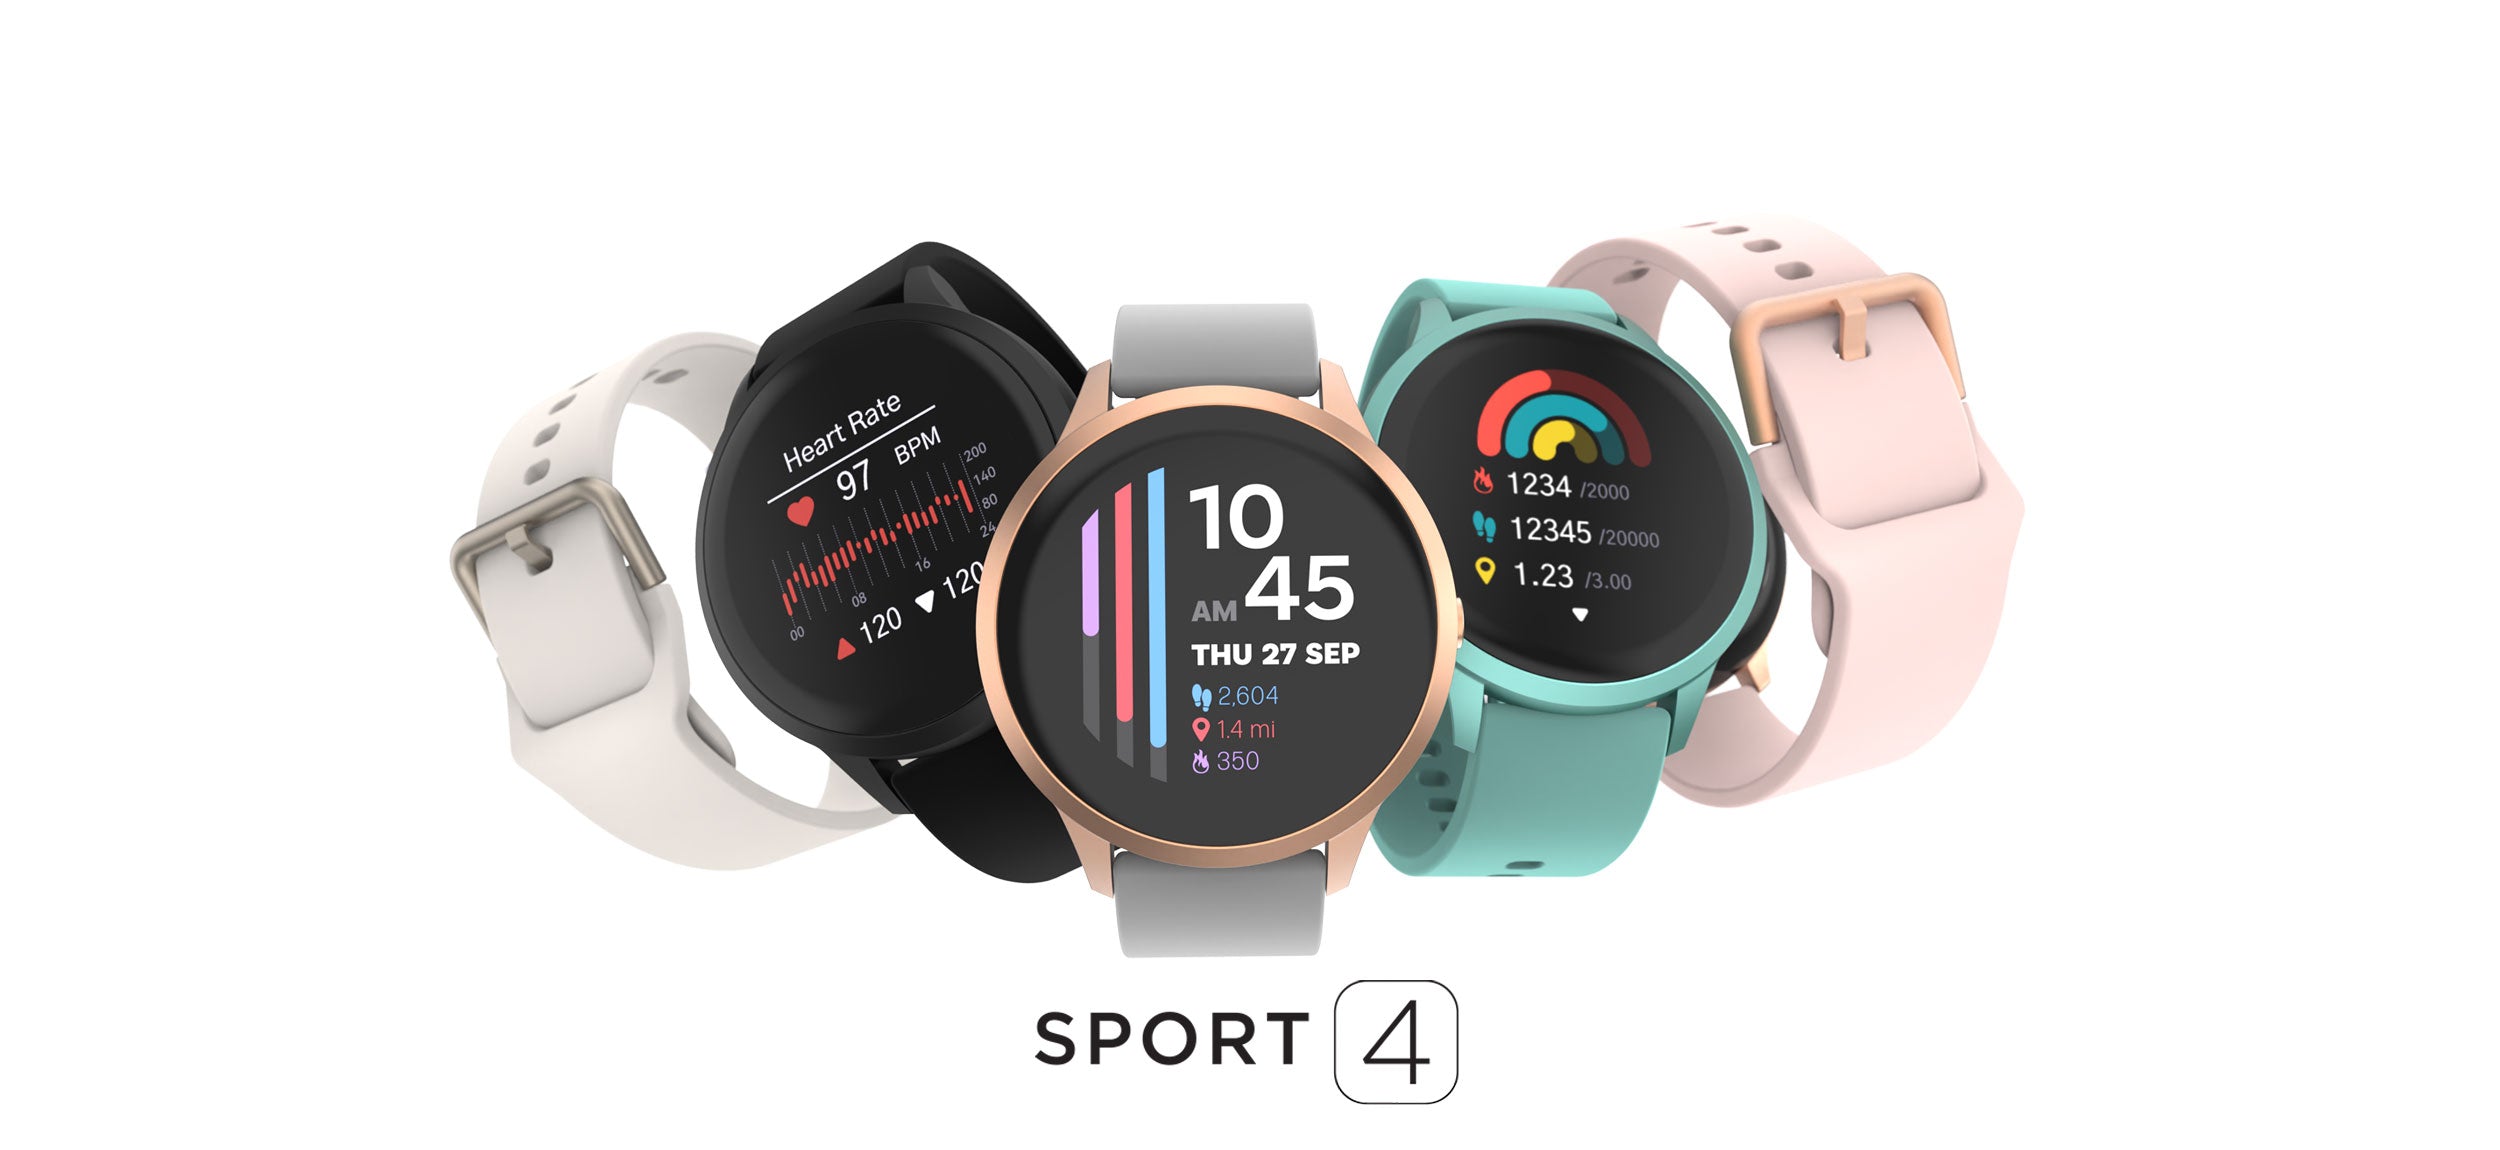 iTouch Sport4 Smartwatch